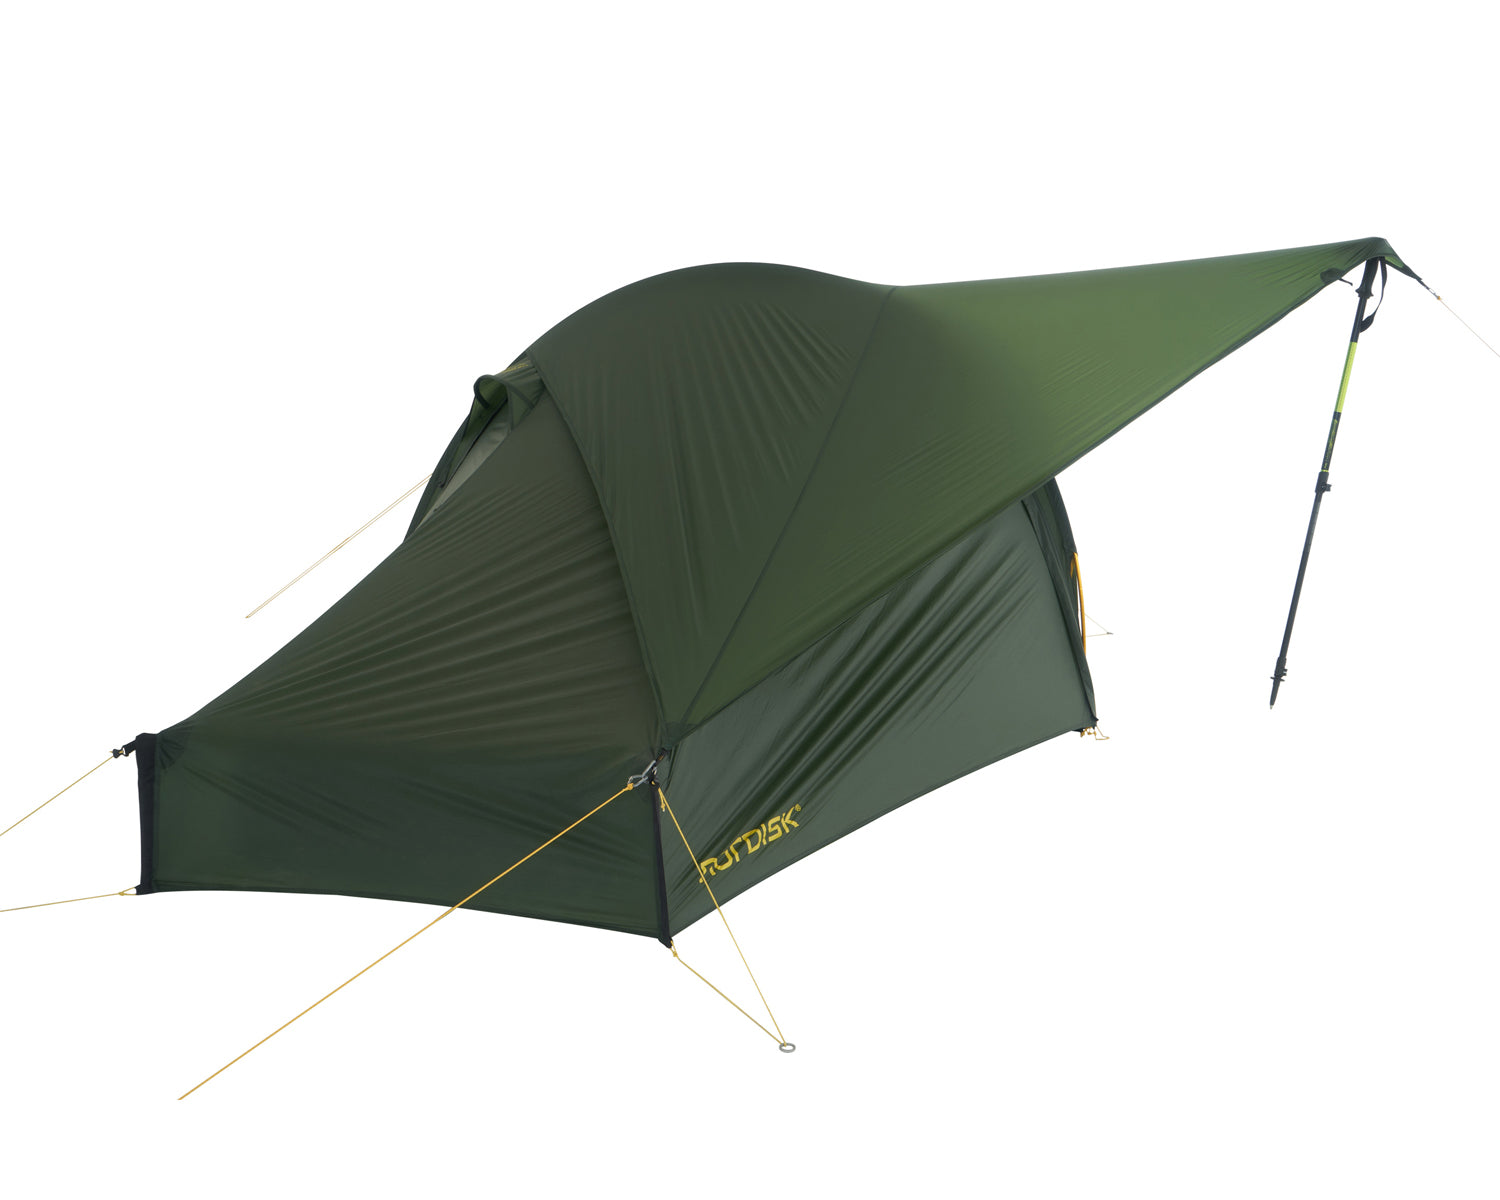 Voss 2 LW tentwing - 2 m² - Forest Green